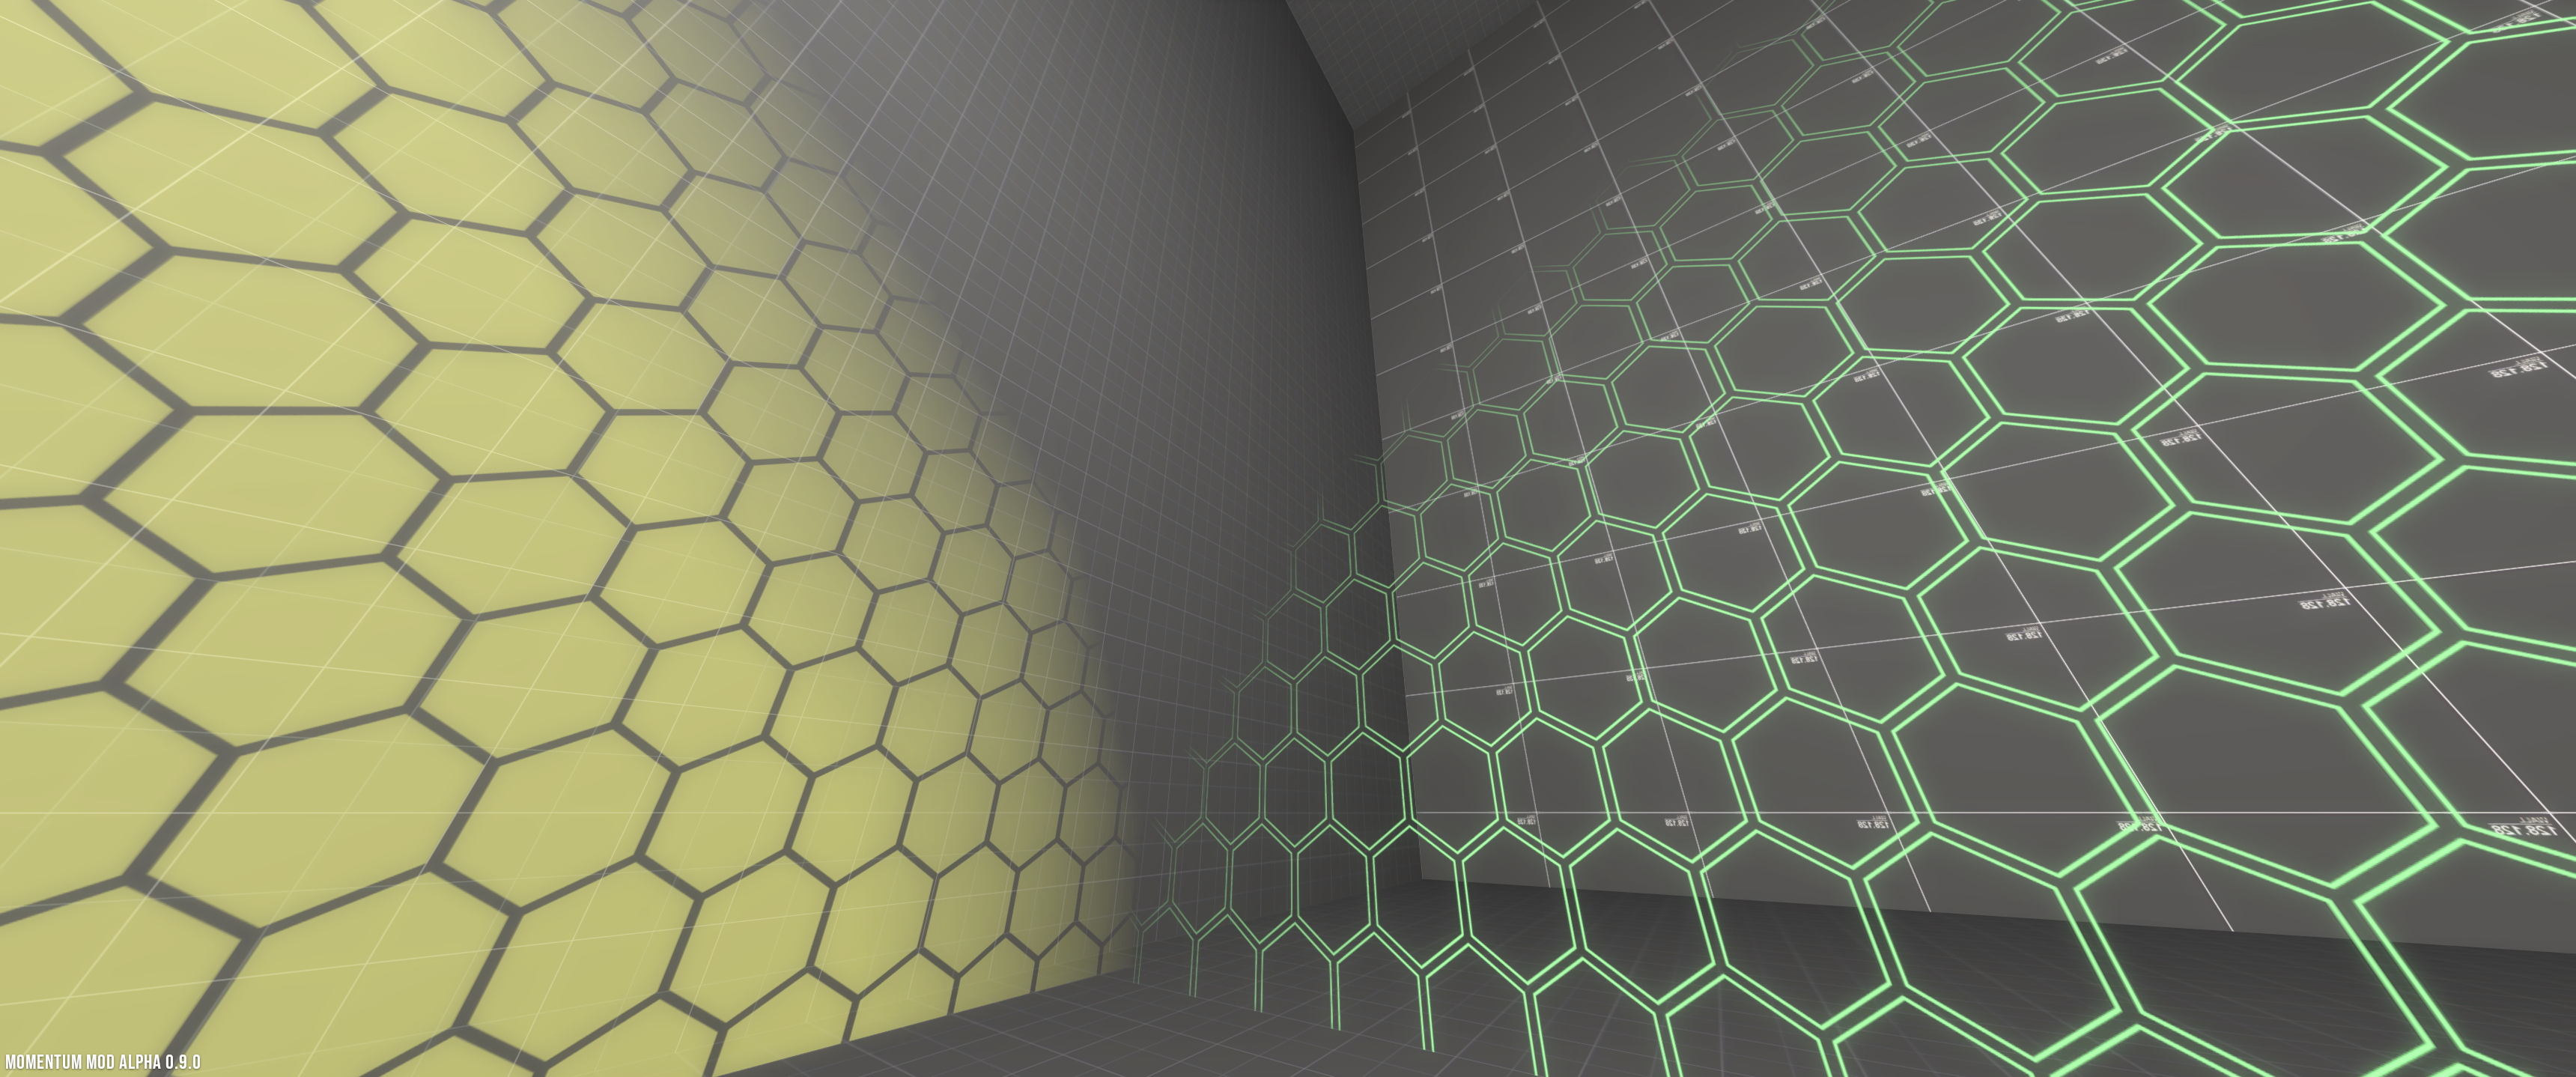 holographic_honeycomb_screenie.png